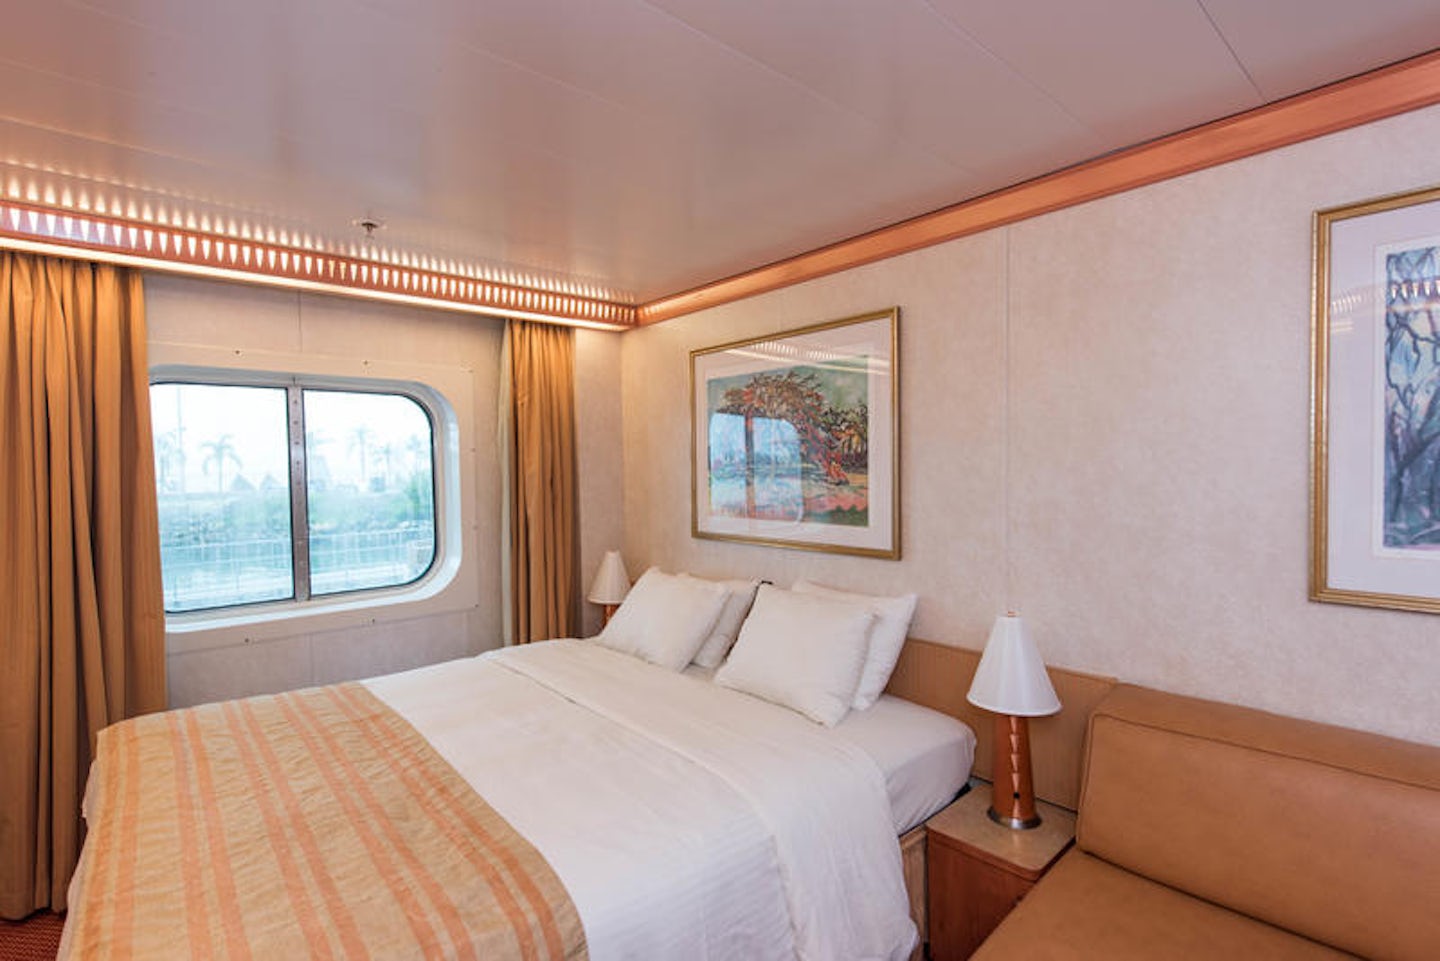 The Ocean-View Cabin on Carnival Miracle